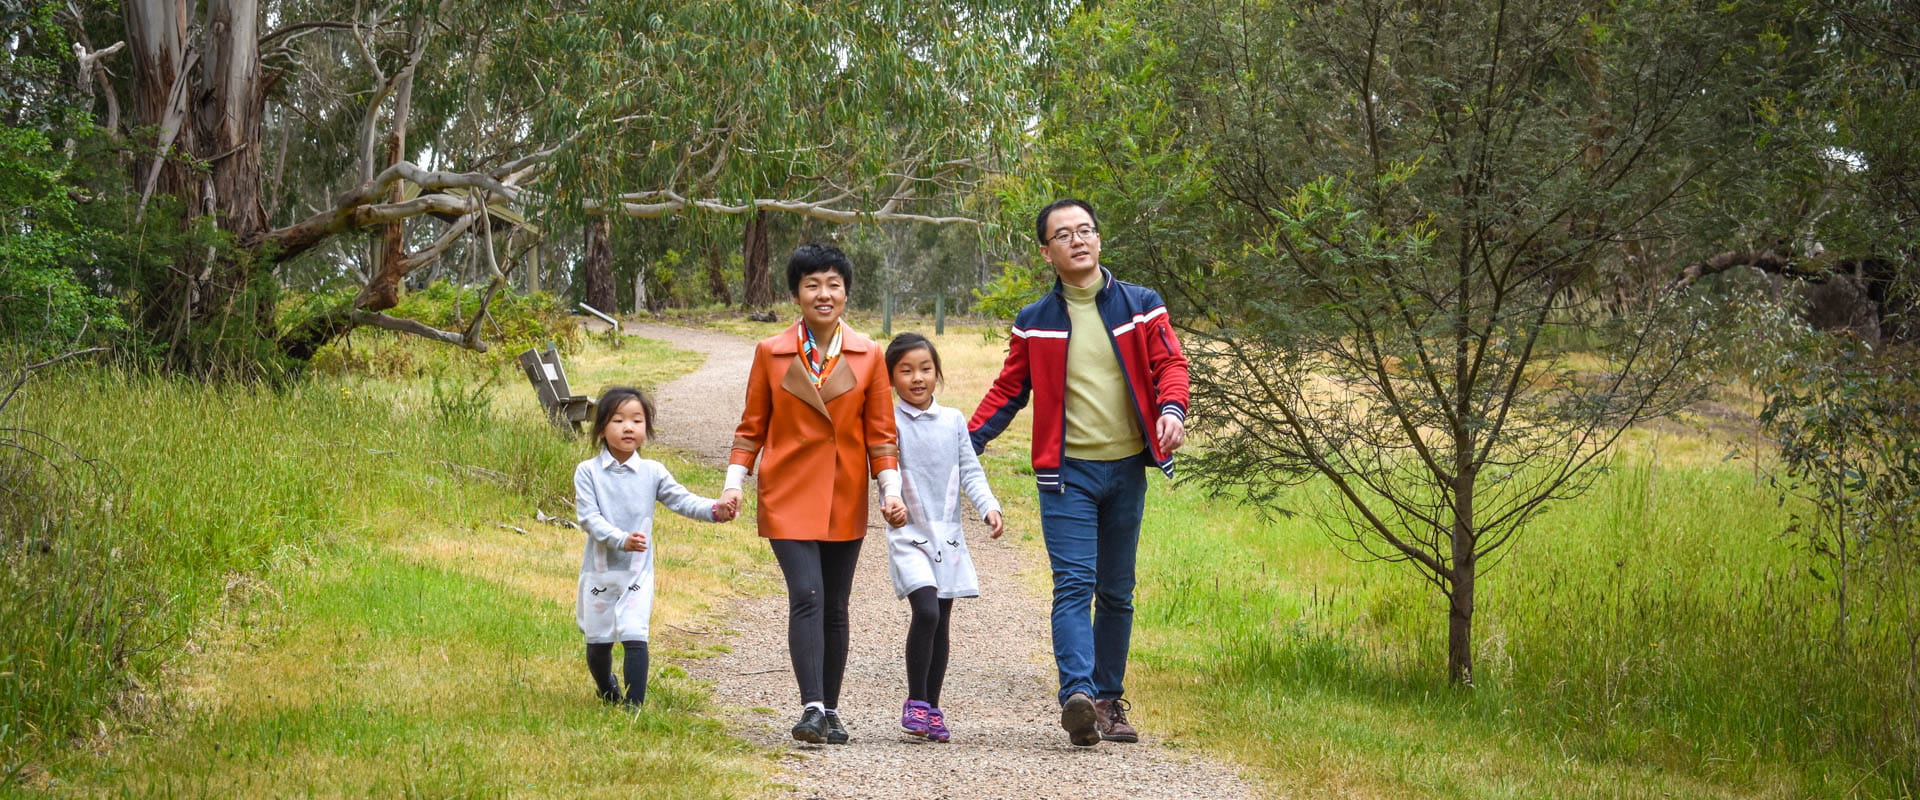 A family walk down a paved path surrounded by green grass and mature trees. 